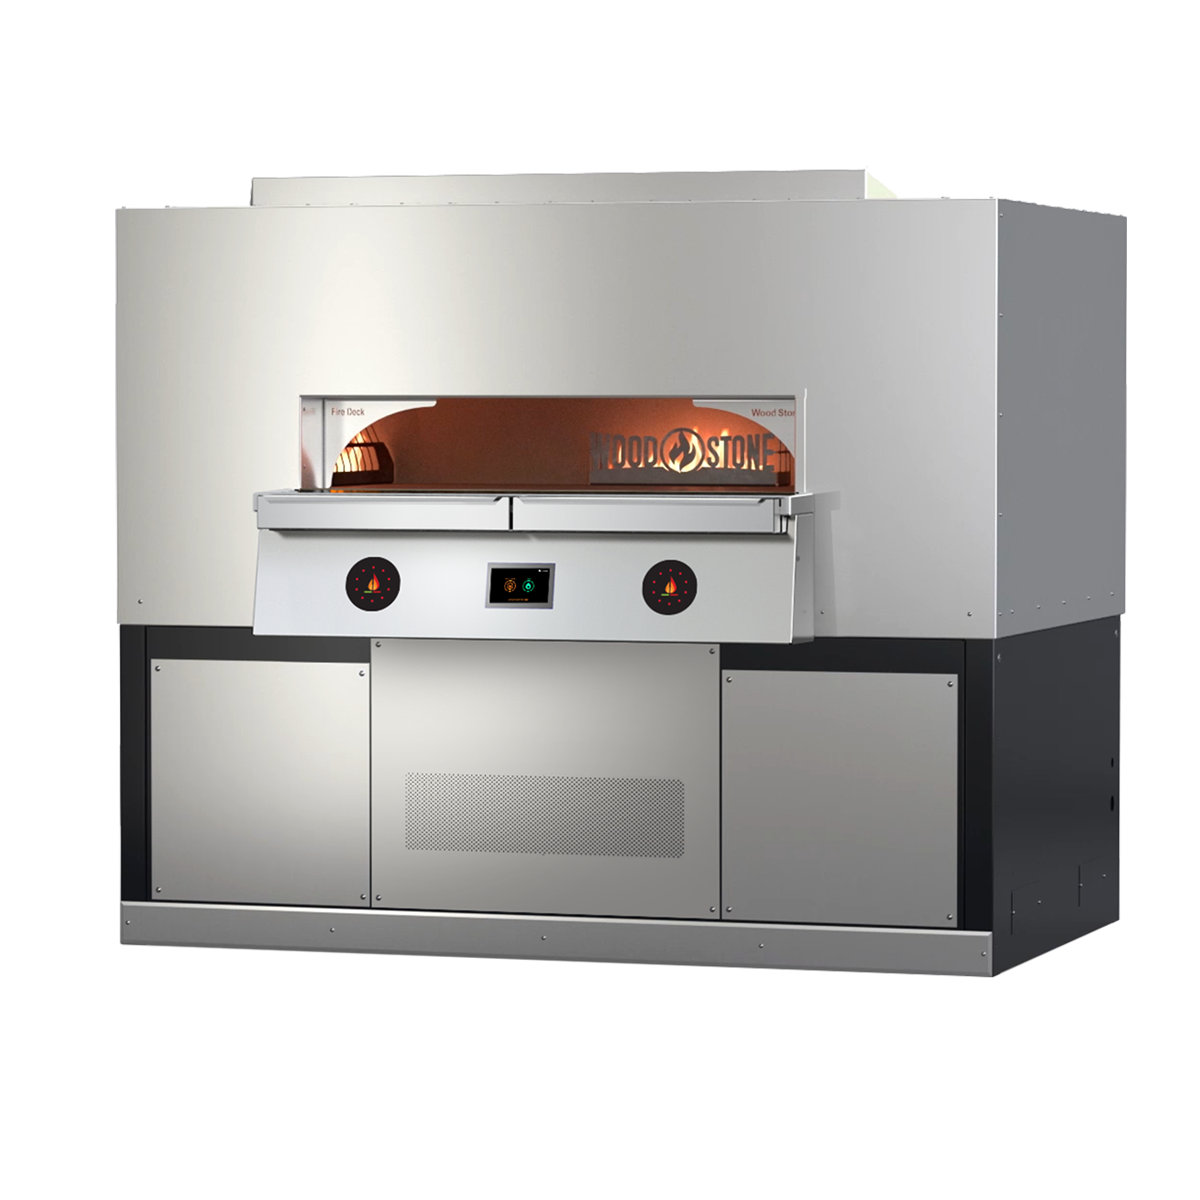 Fire Deck Automatic 9660 oven